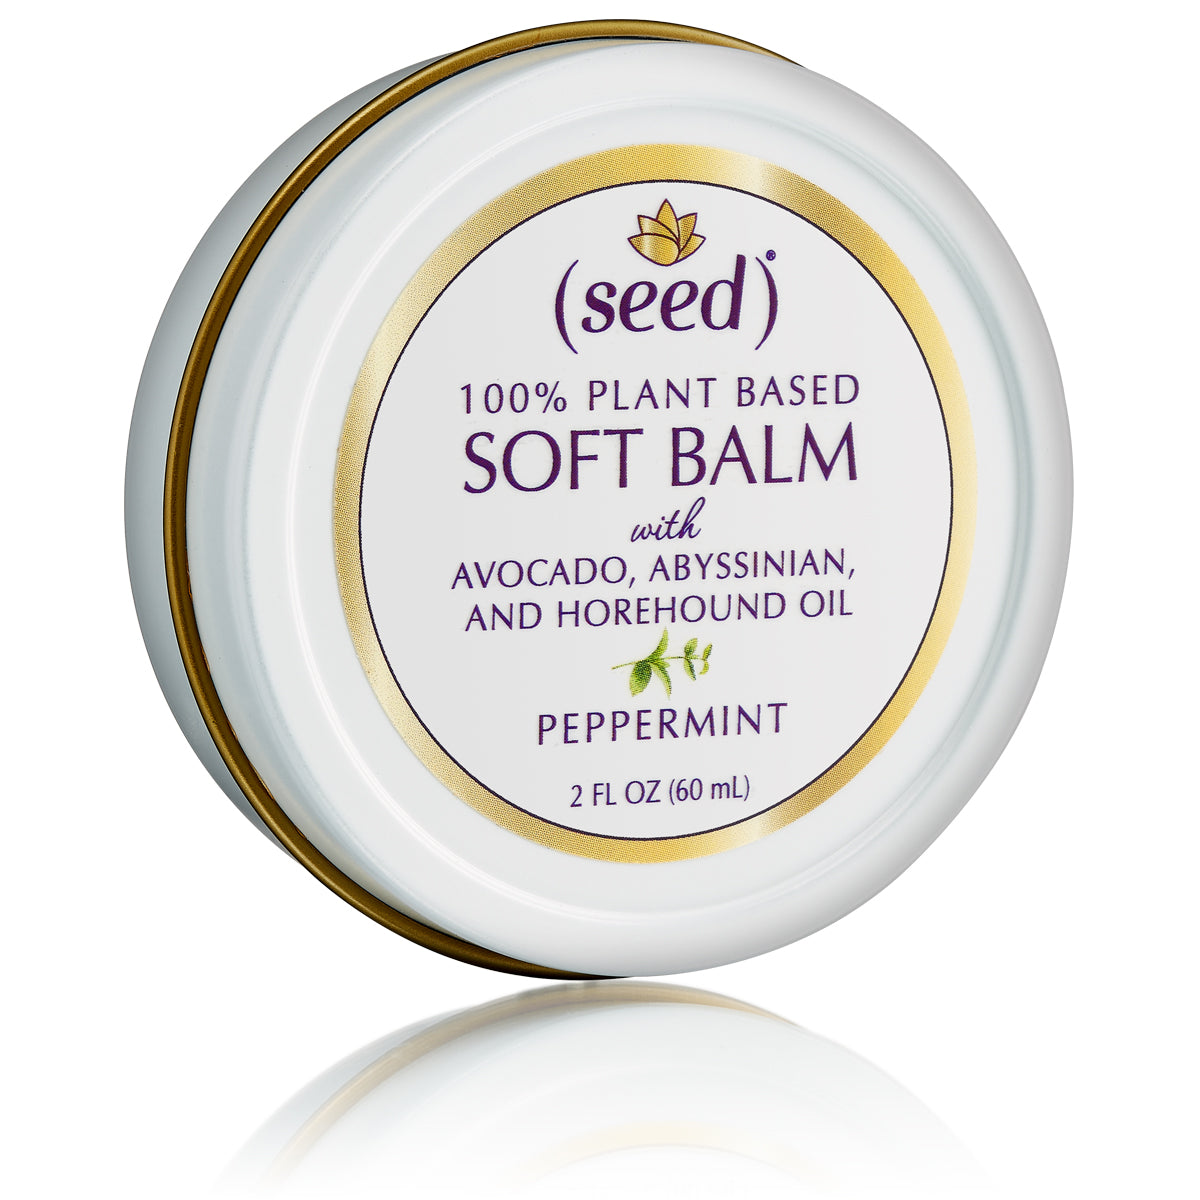 Seed Peppermint Soft Balm for very dry skin and lips with peppermint essential oil in 2 oz tin